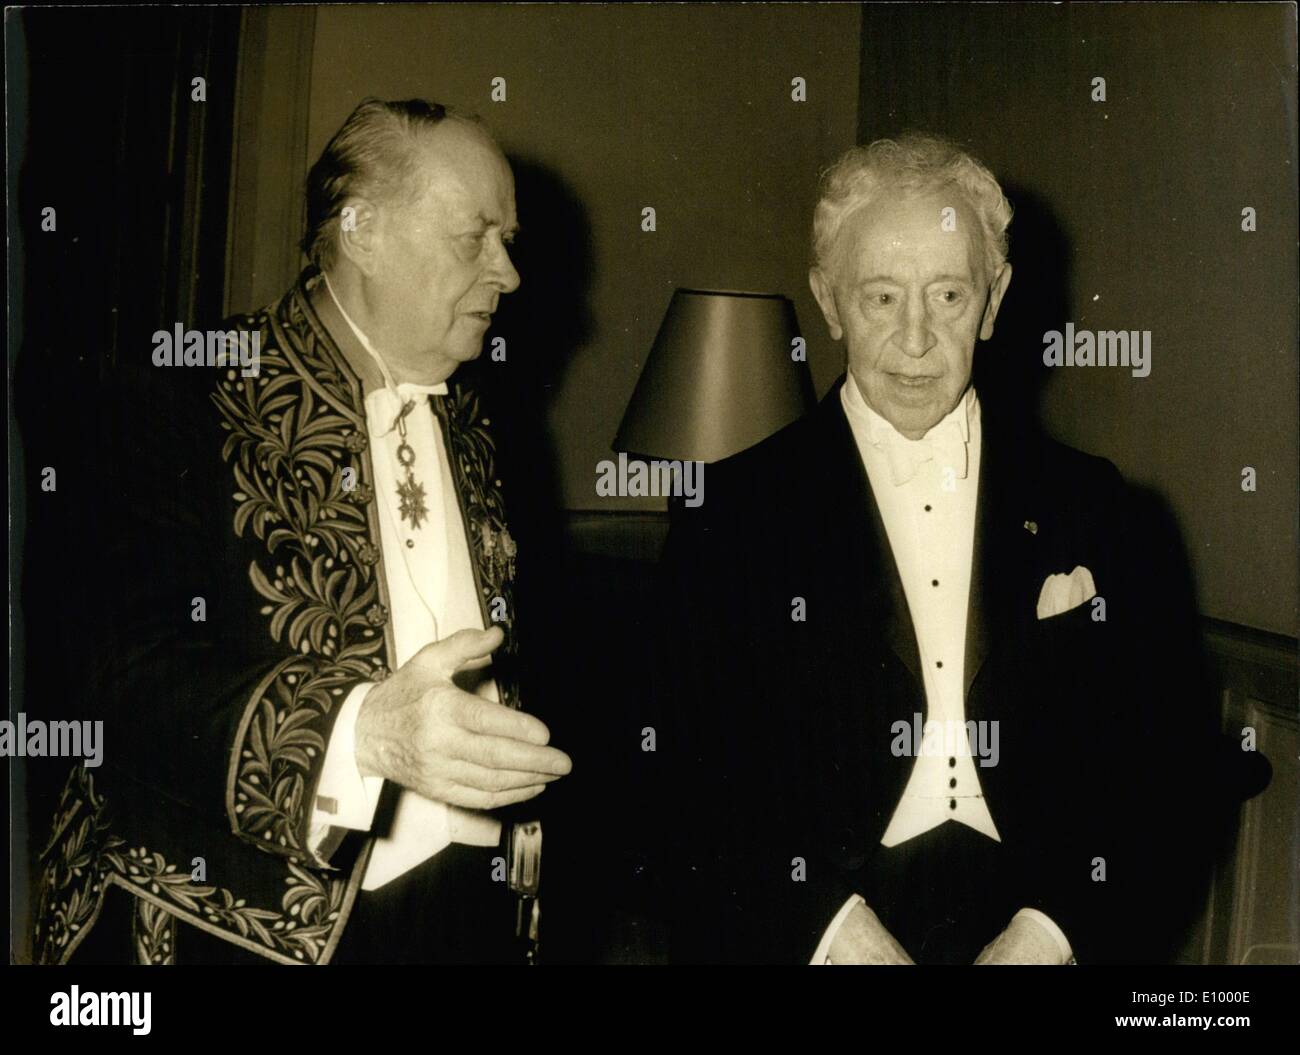 Arthur rubinstein hi-res stock photography and images - Alamy